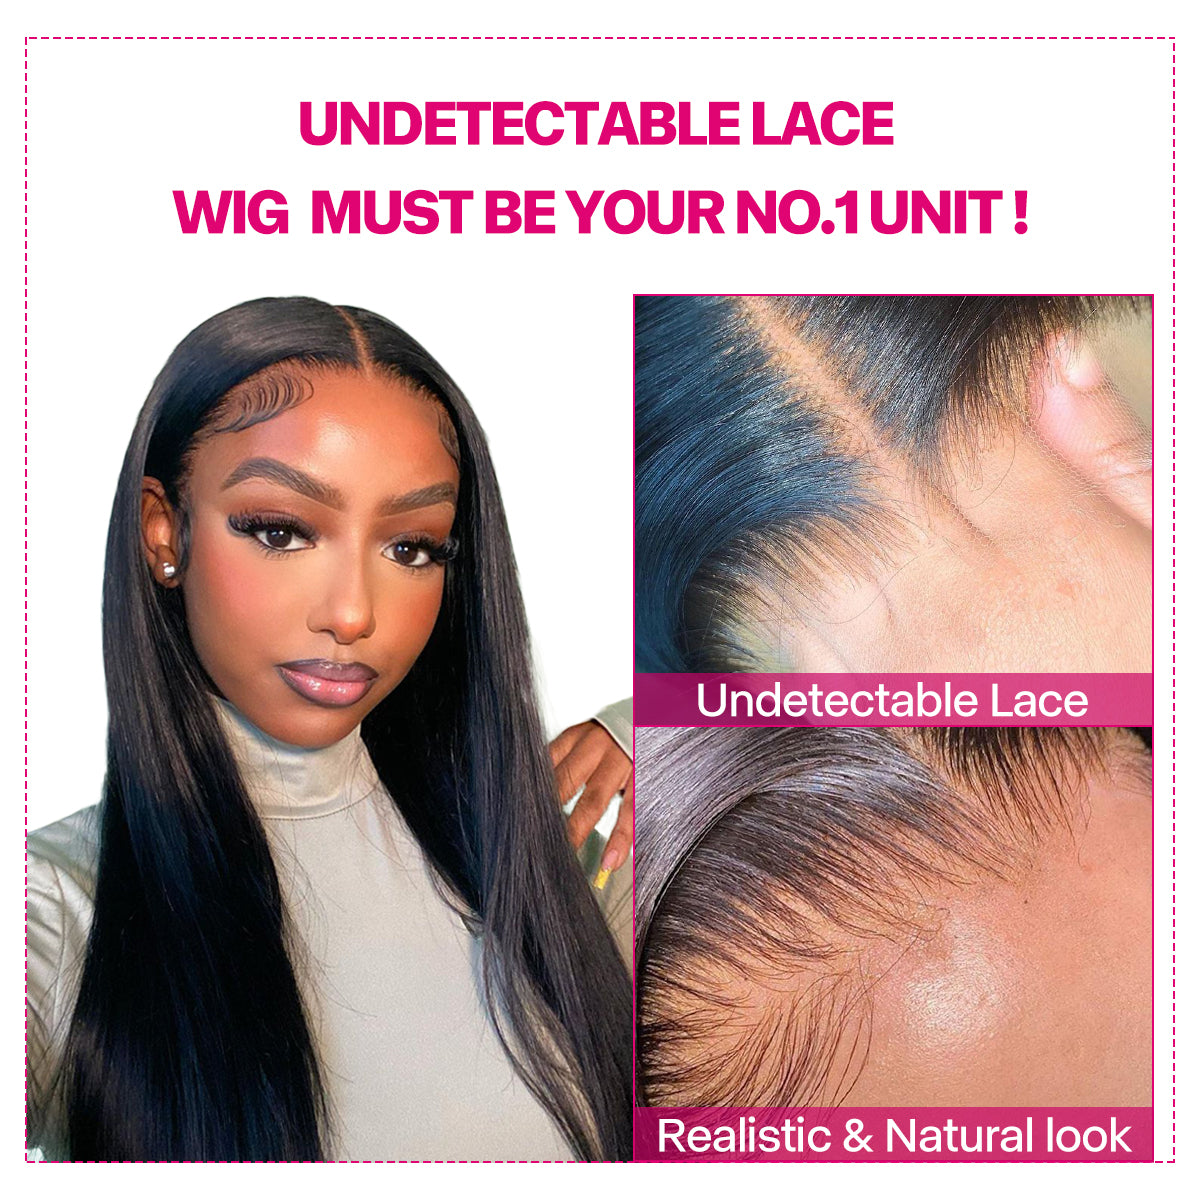 upgraded undetectable lace